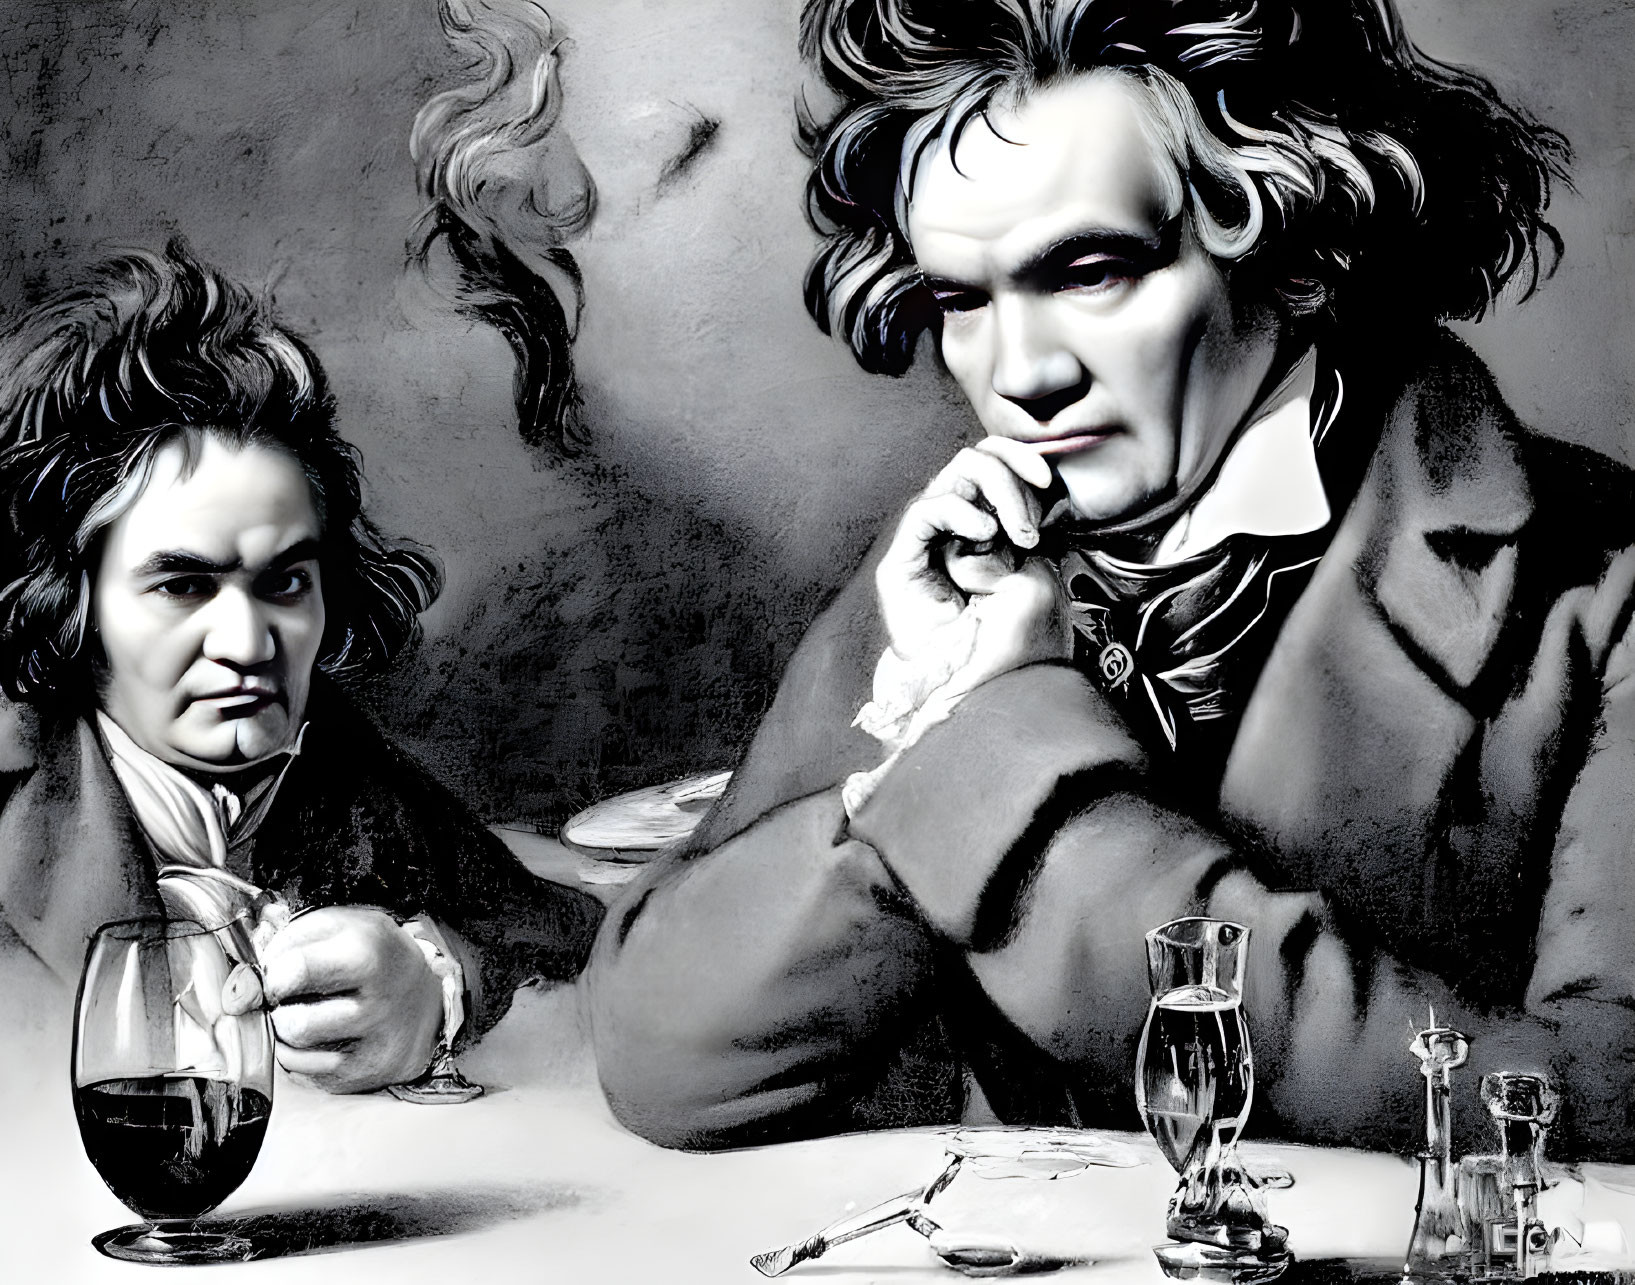 Monochrome illustration of two men at a table with wine.